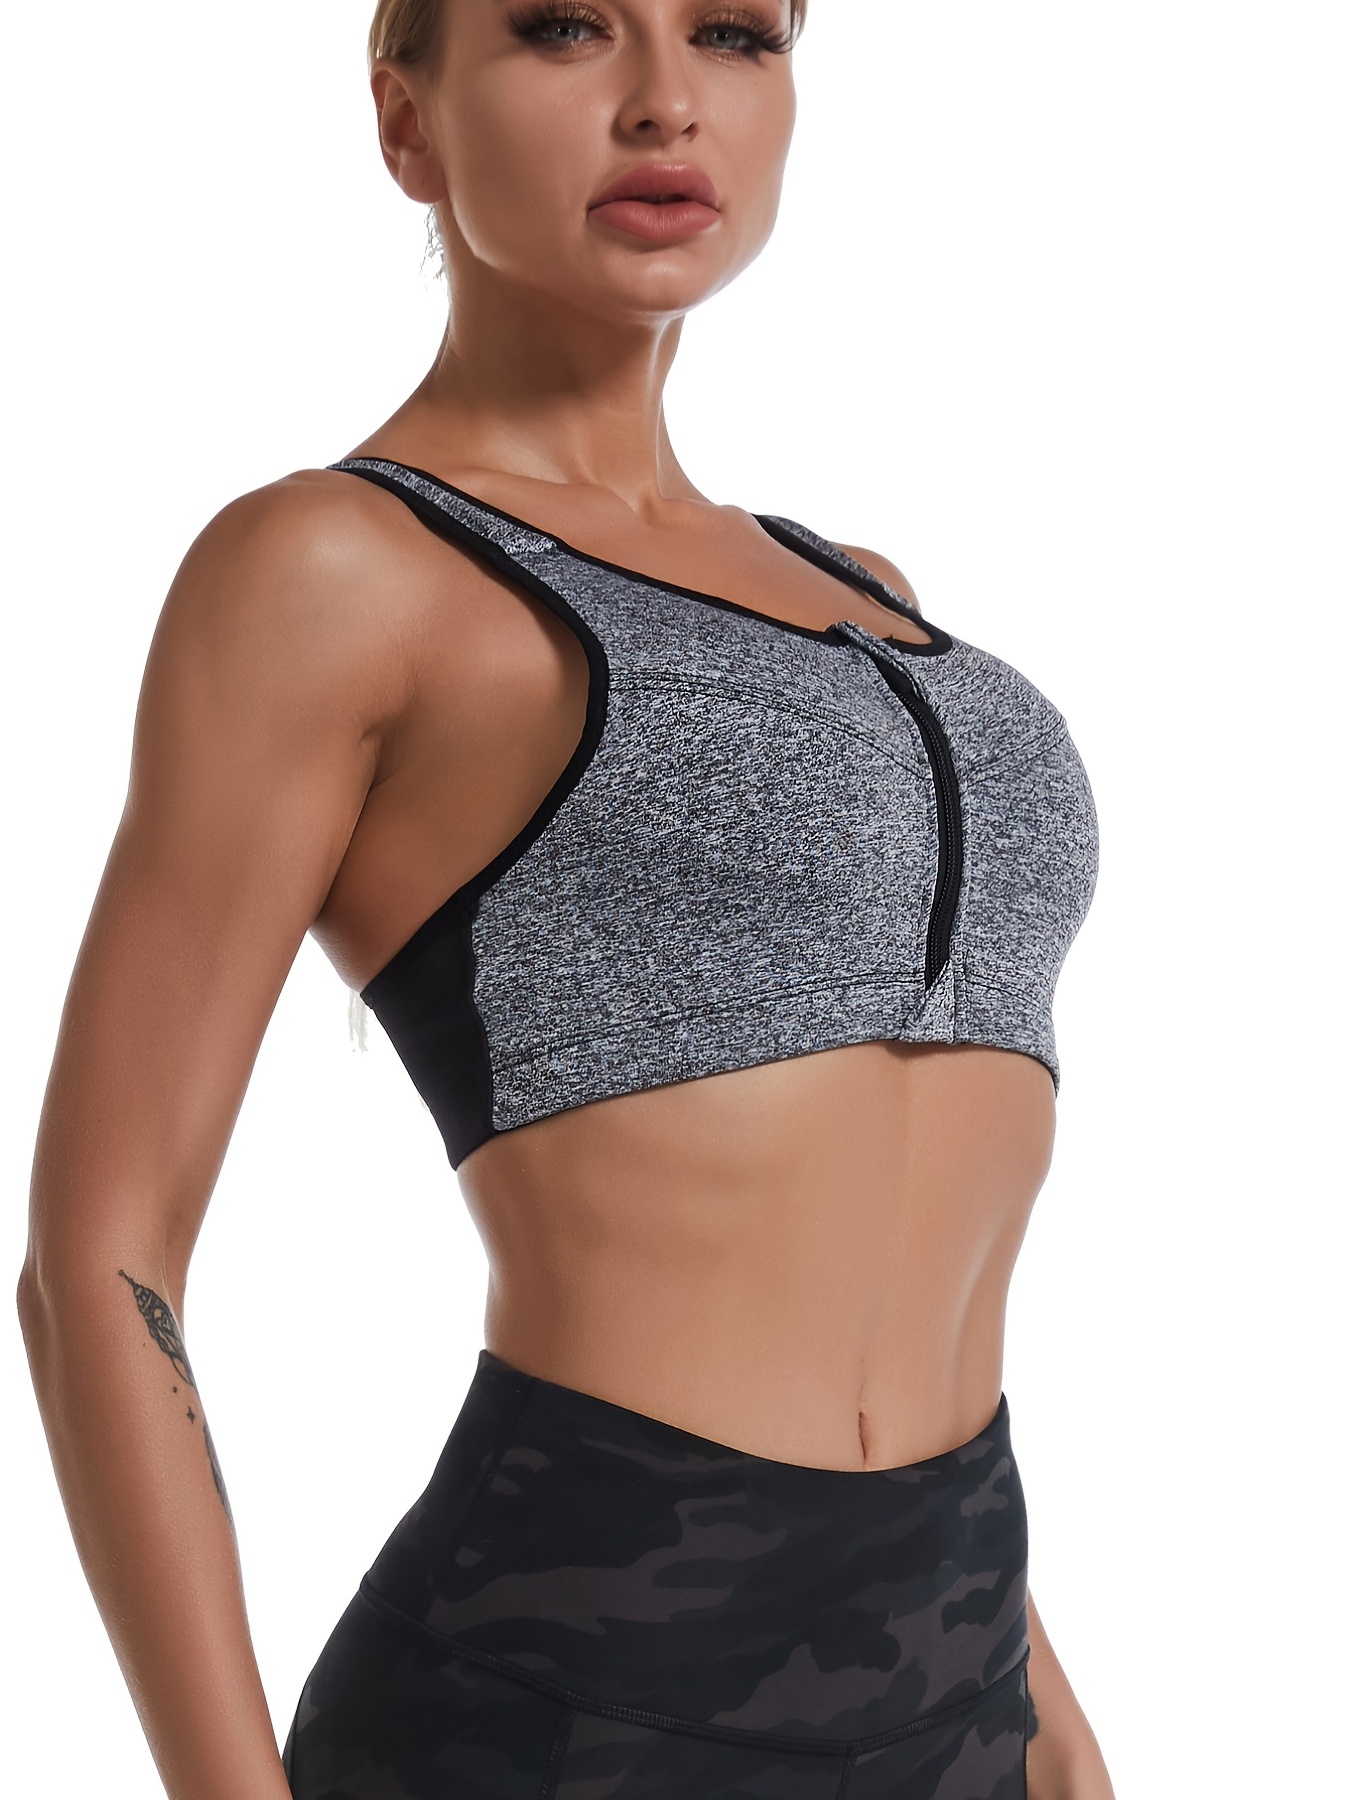 ZYZSTR Sports Bras for Women's Gym Running Solid Color Seamless